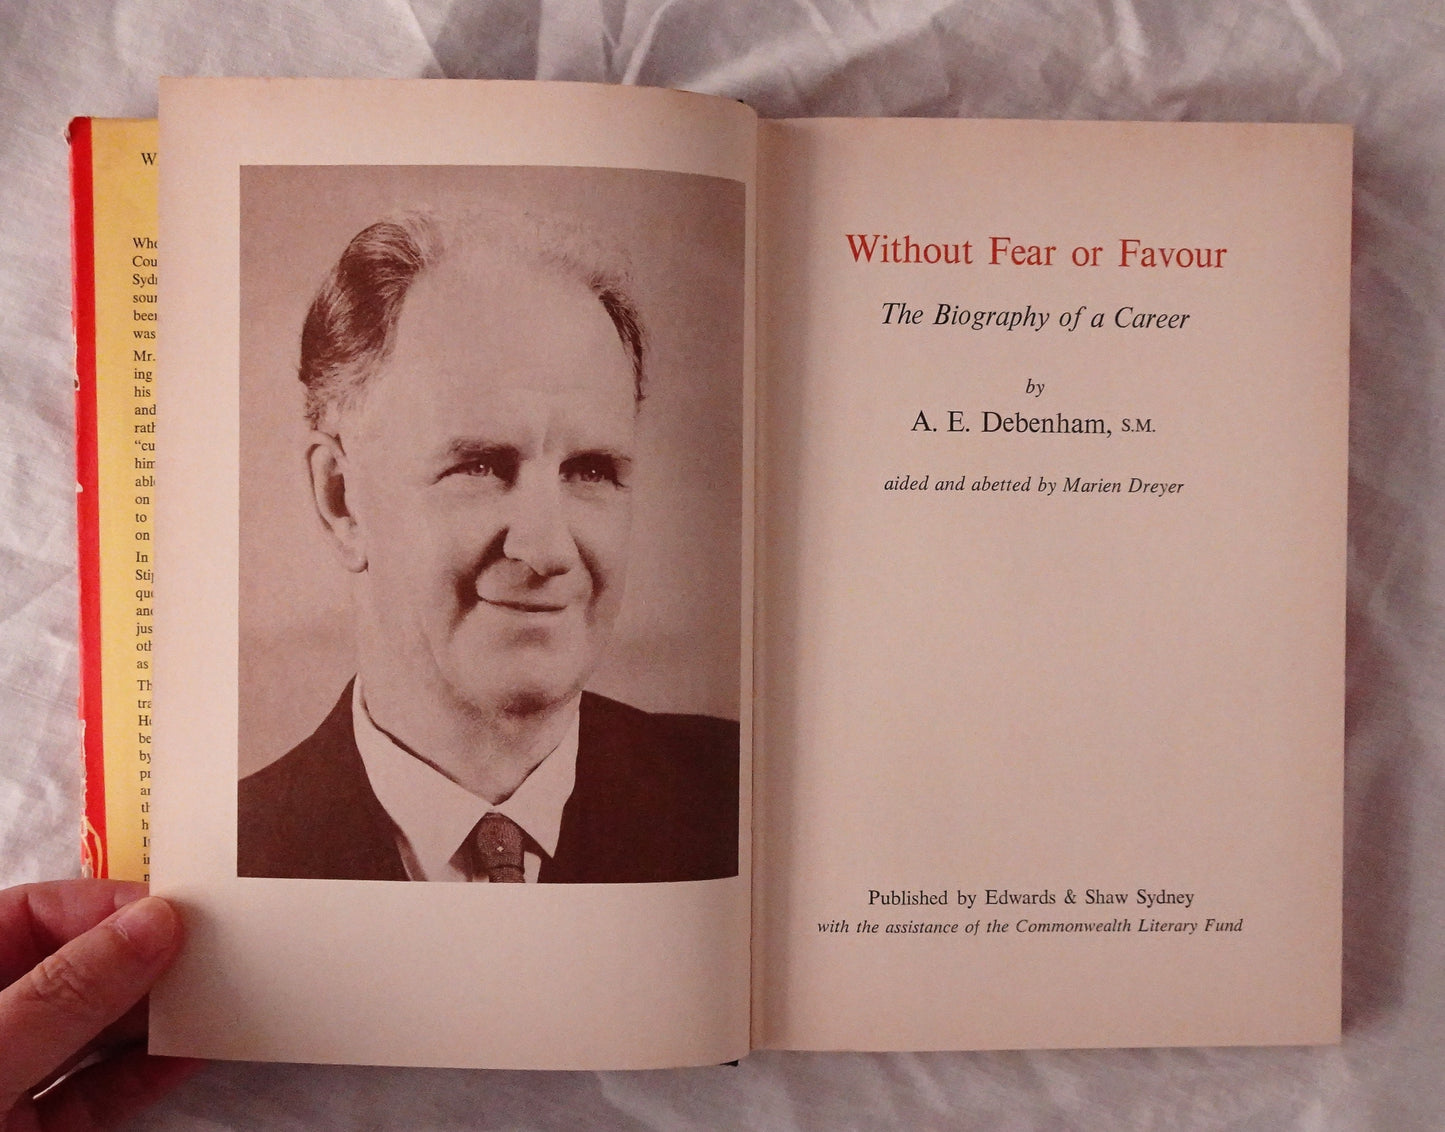 Without Fear or Favour by A. E. Debenham